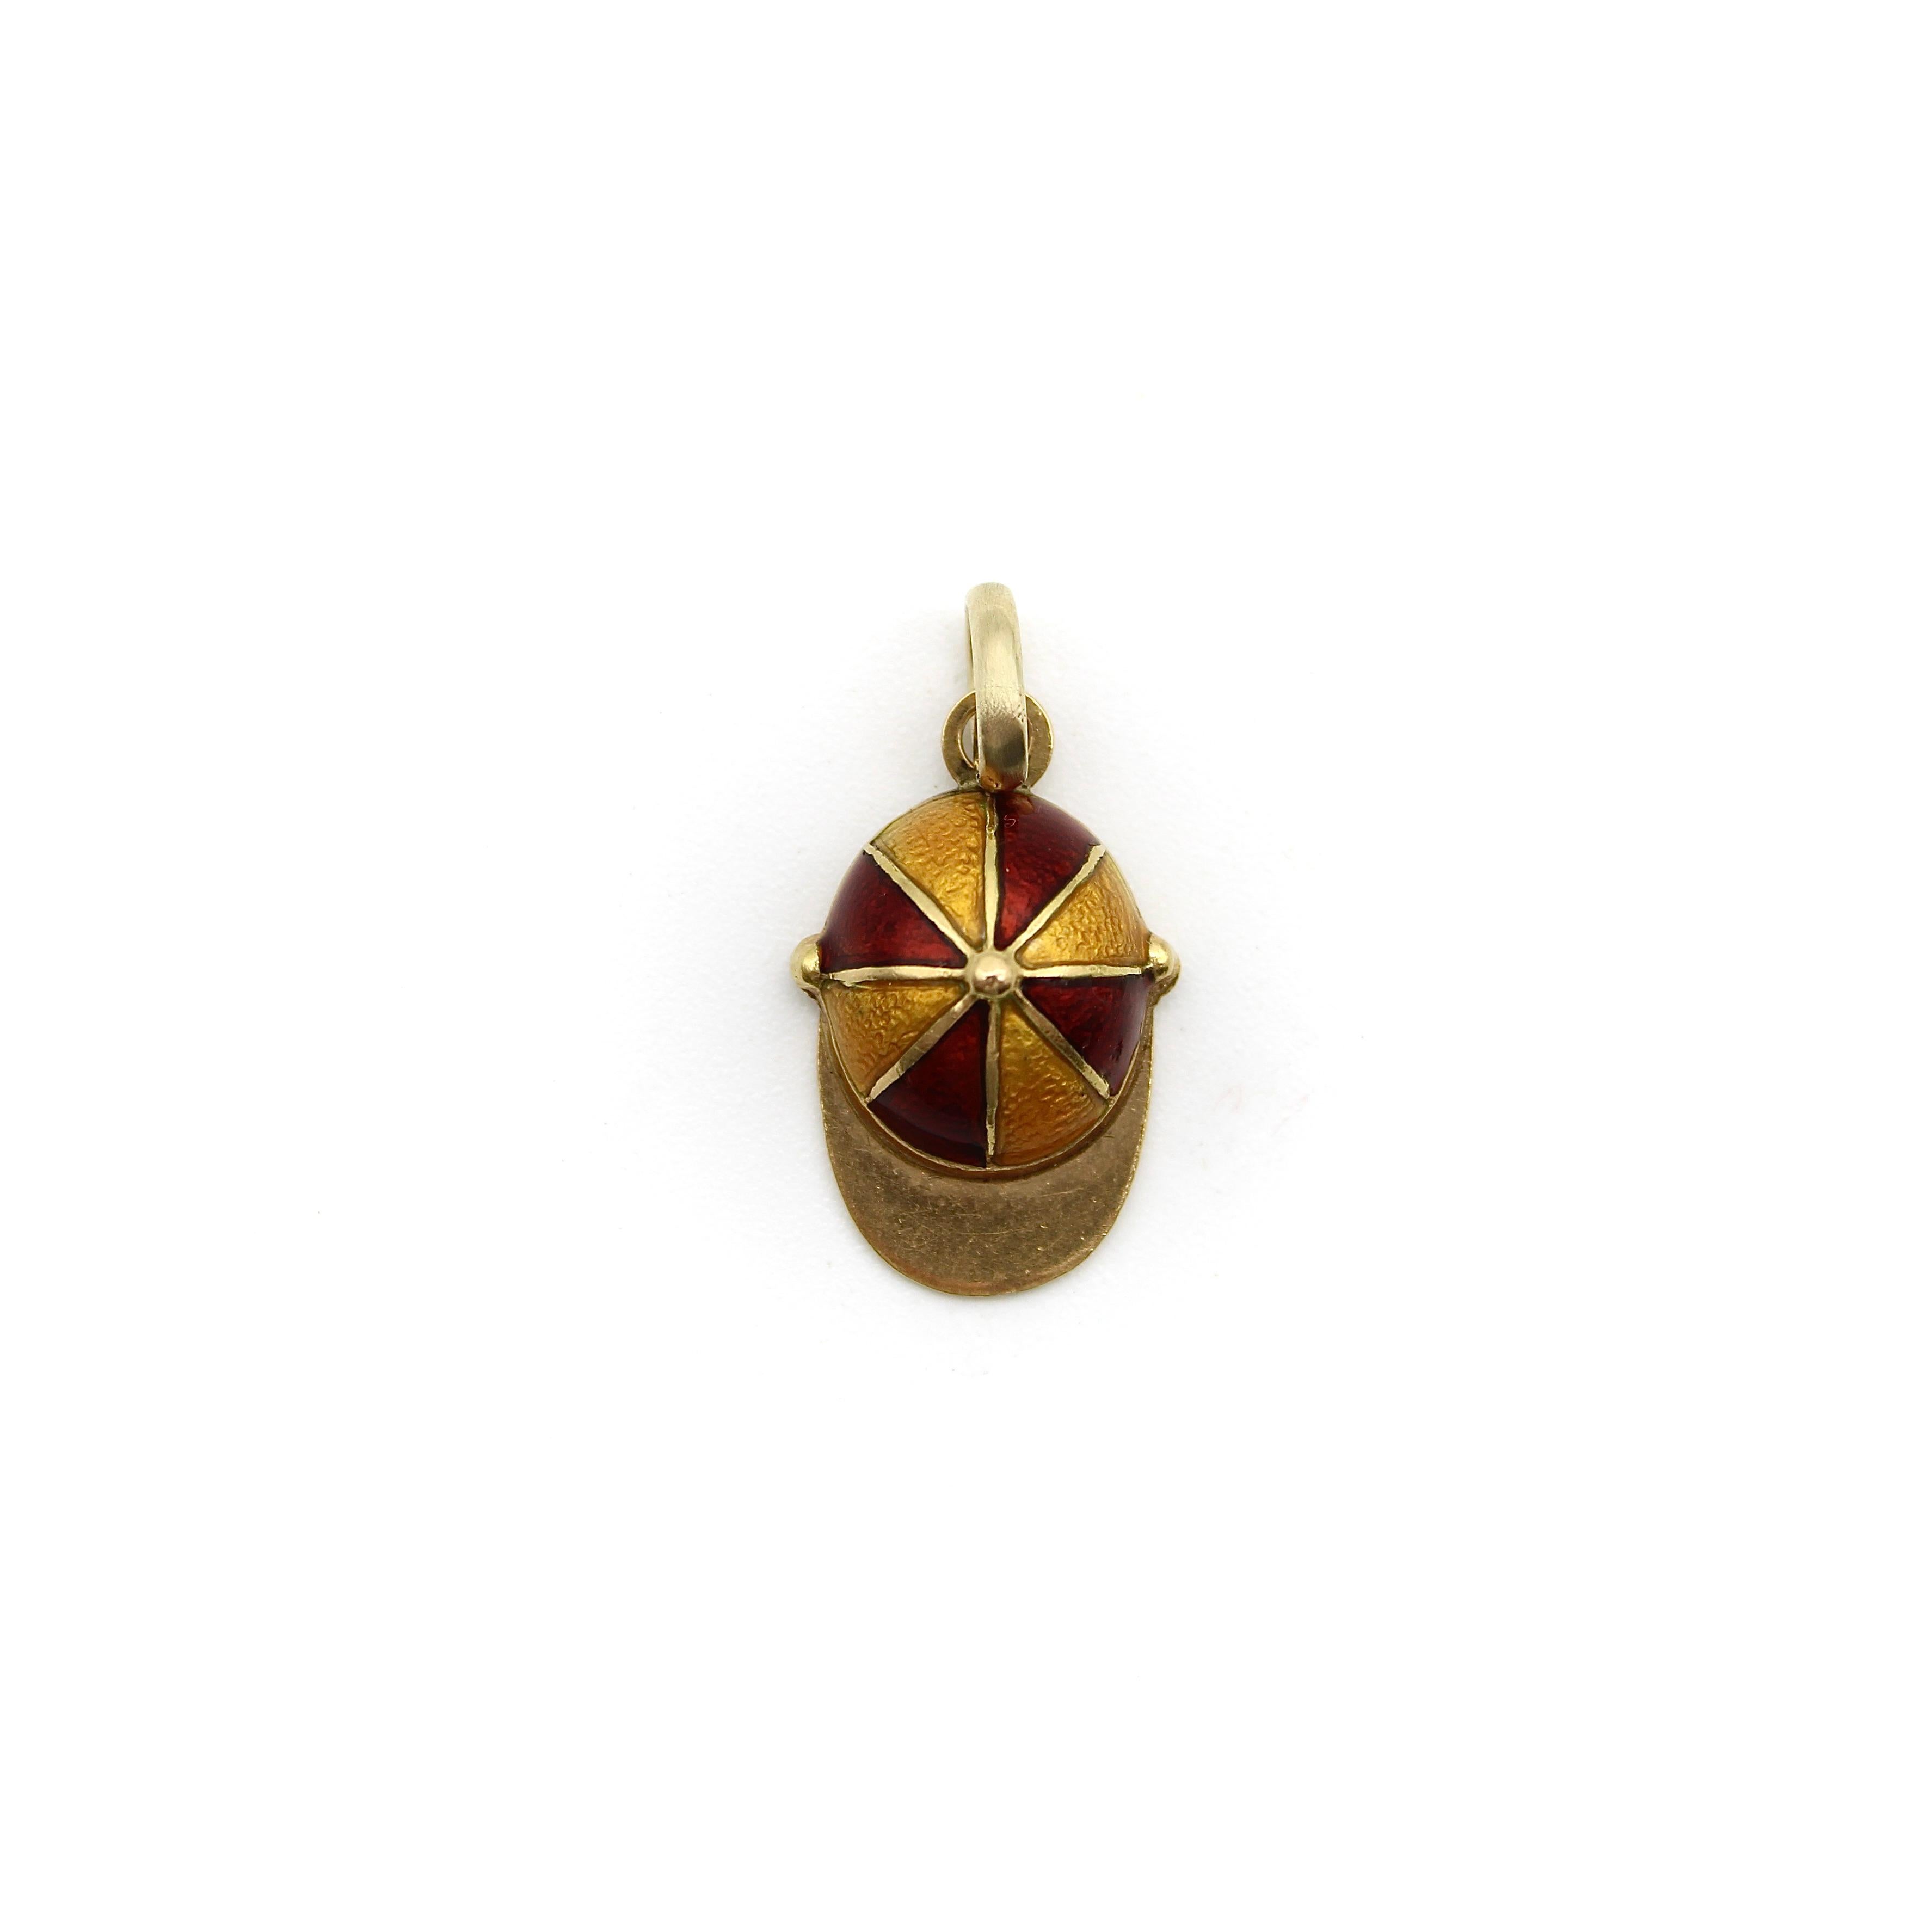 A colorful charm with beautiful red and yellow enamel work, this 18k gold Edwardian jockey hat charm adds a pop of color to any ensemble. The gold is textured underneath the enamel for a lovely visual effect that brings the charm to life.